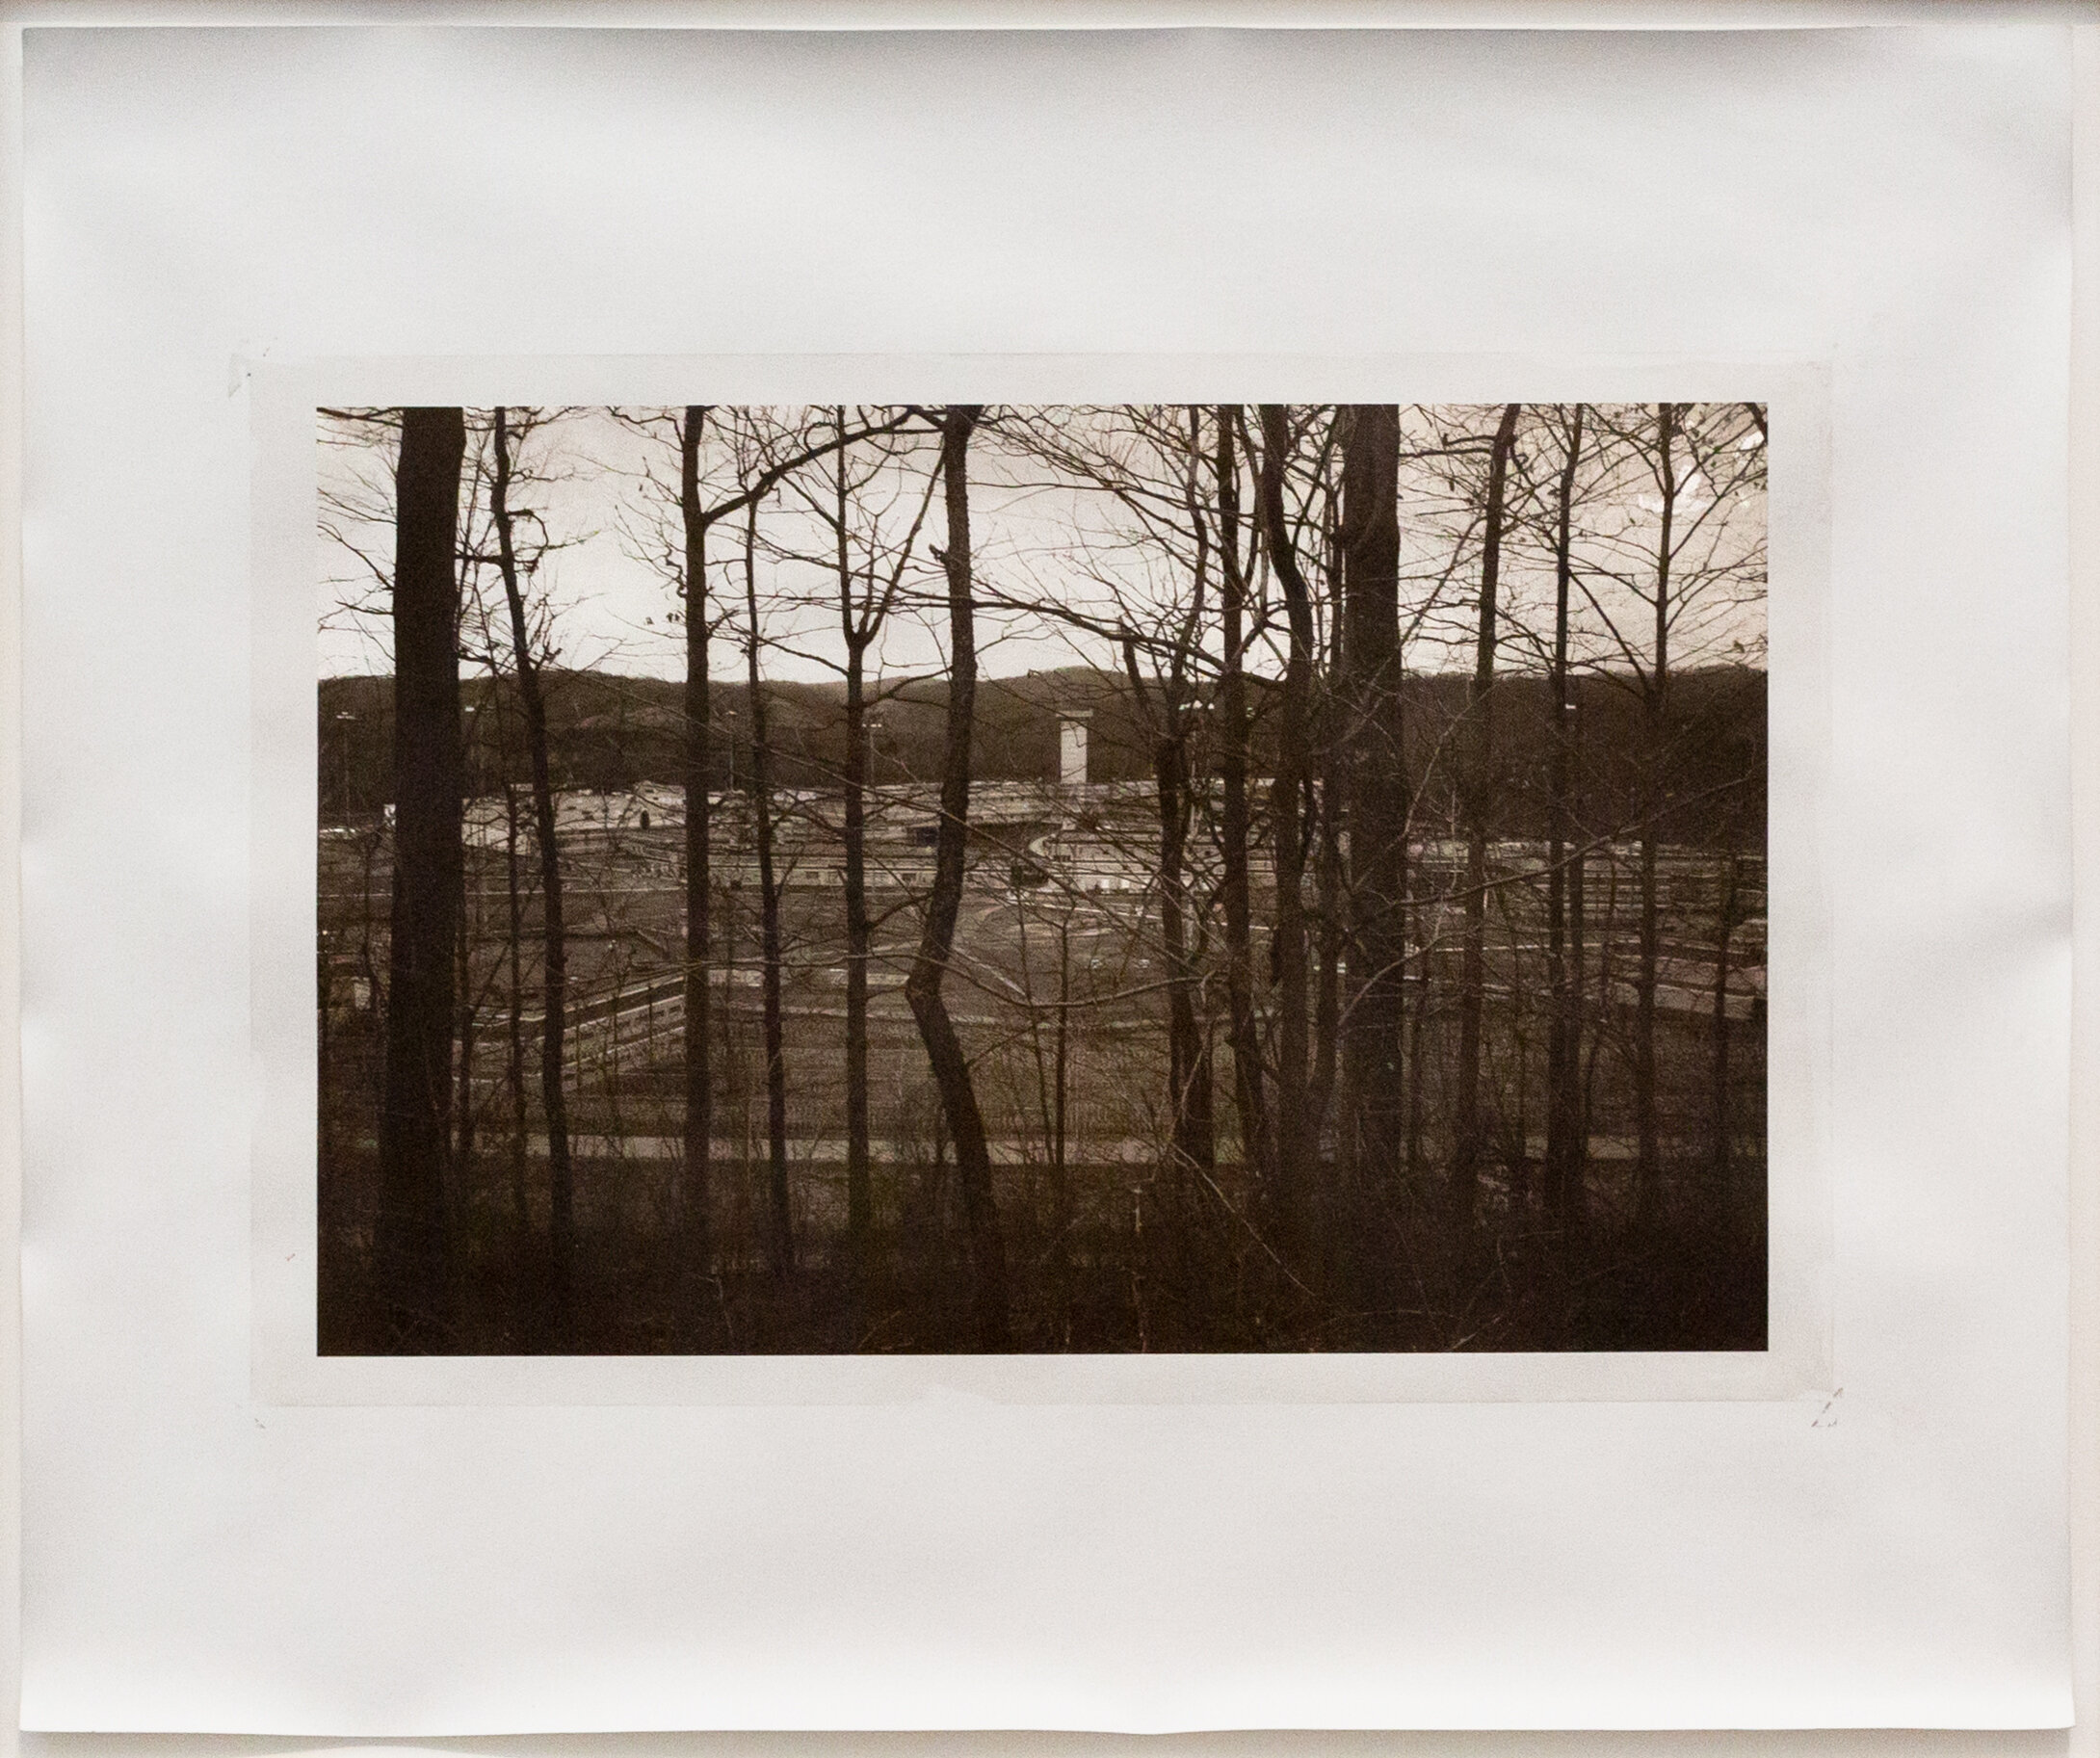  Better or Equal Use: Mount Olive Correctional Complex on the former Bullpush Mountain, 2020 Coal, Gelatin, Dichromate, Paper 20 x 24 inches 